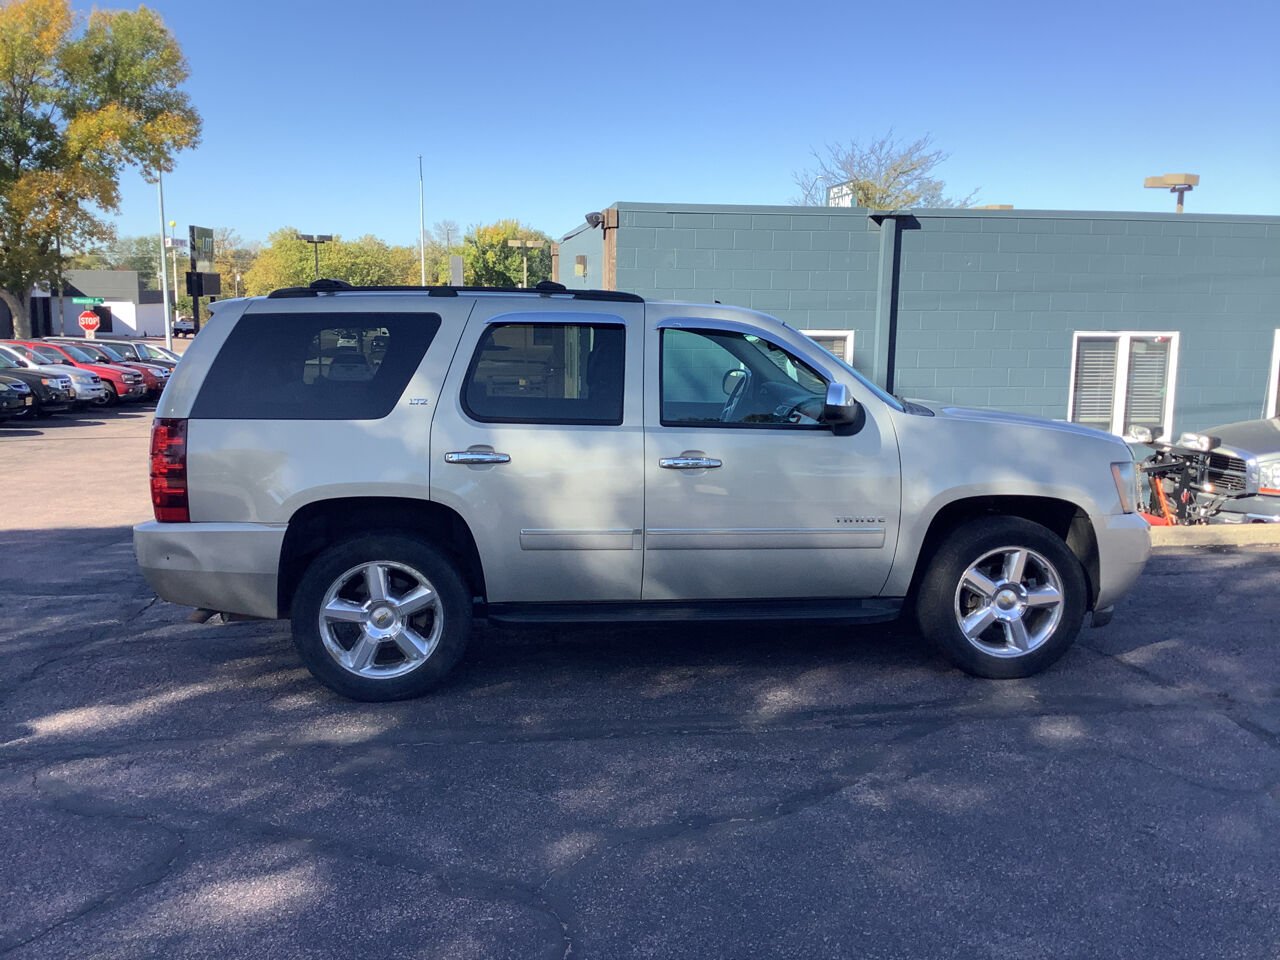 2011 Chevrolet Tahoe Sioux Falls SD